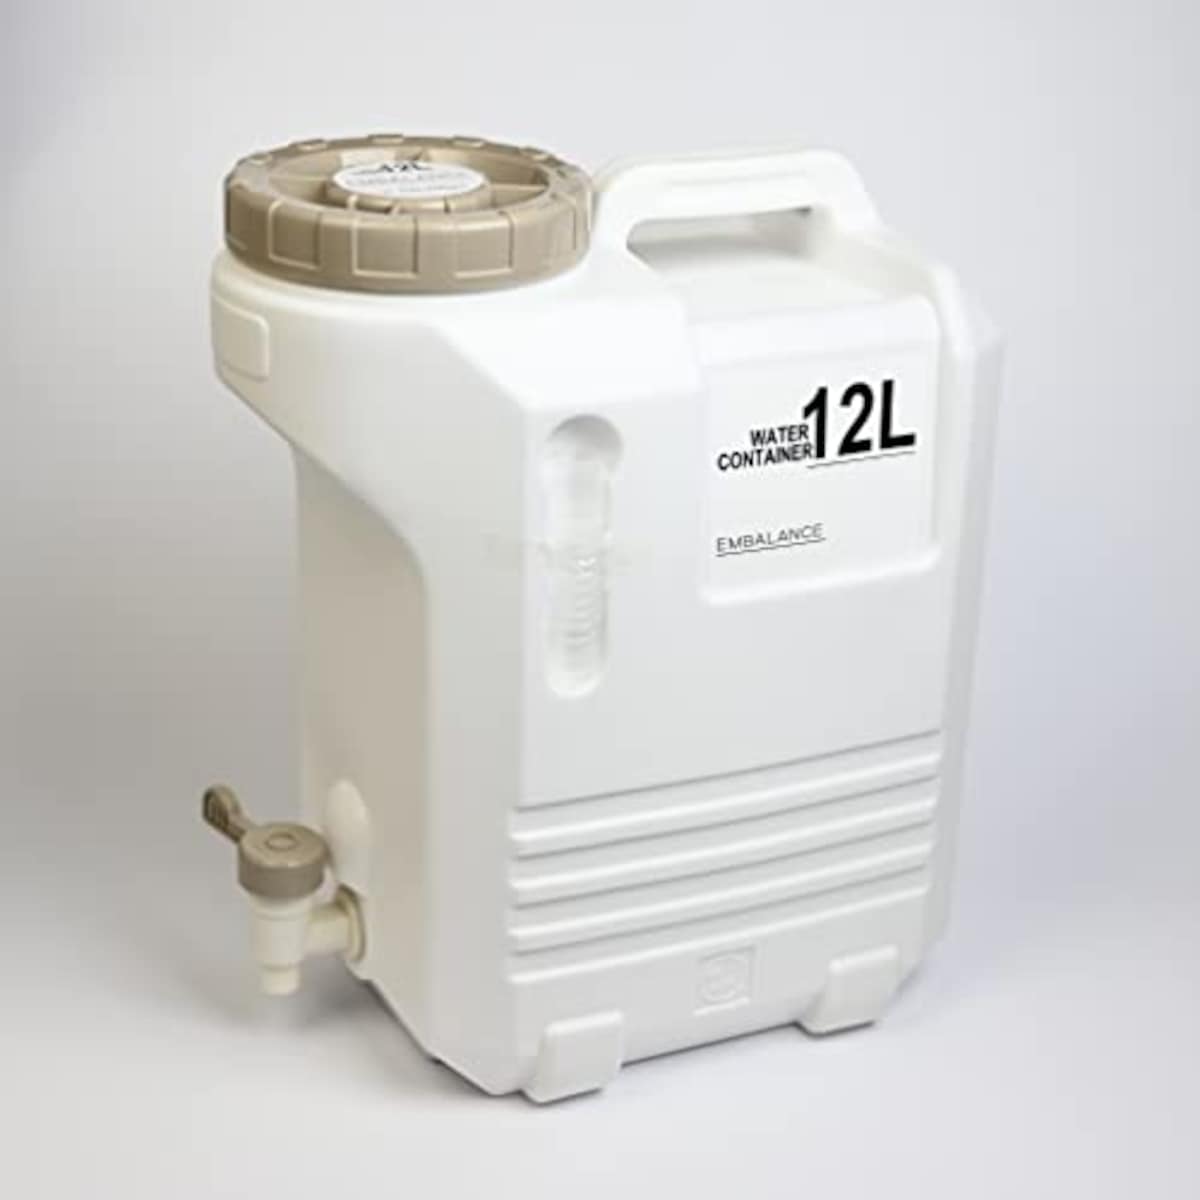 EMBALANCE（エンバランス）WATER CONTAINER 12L